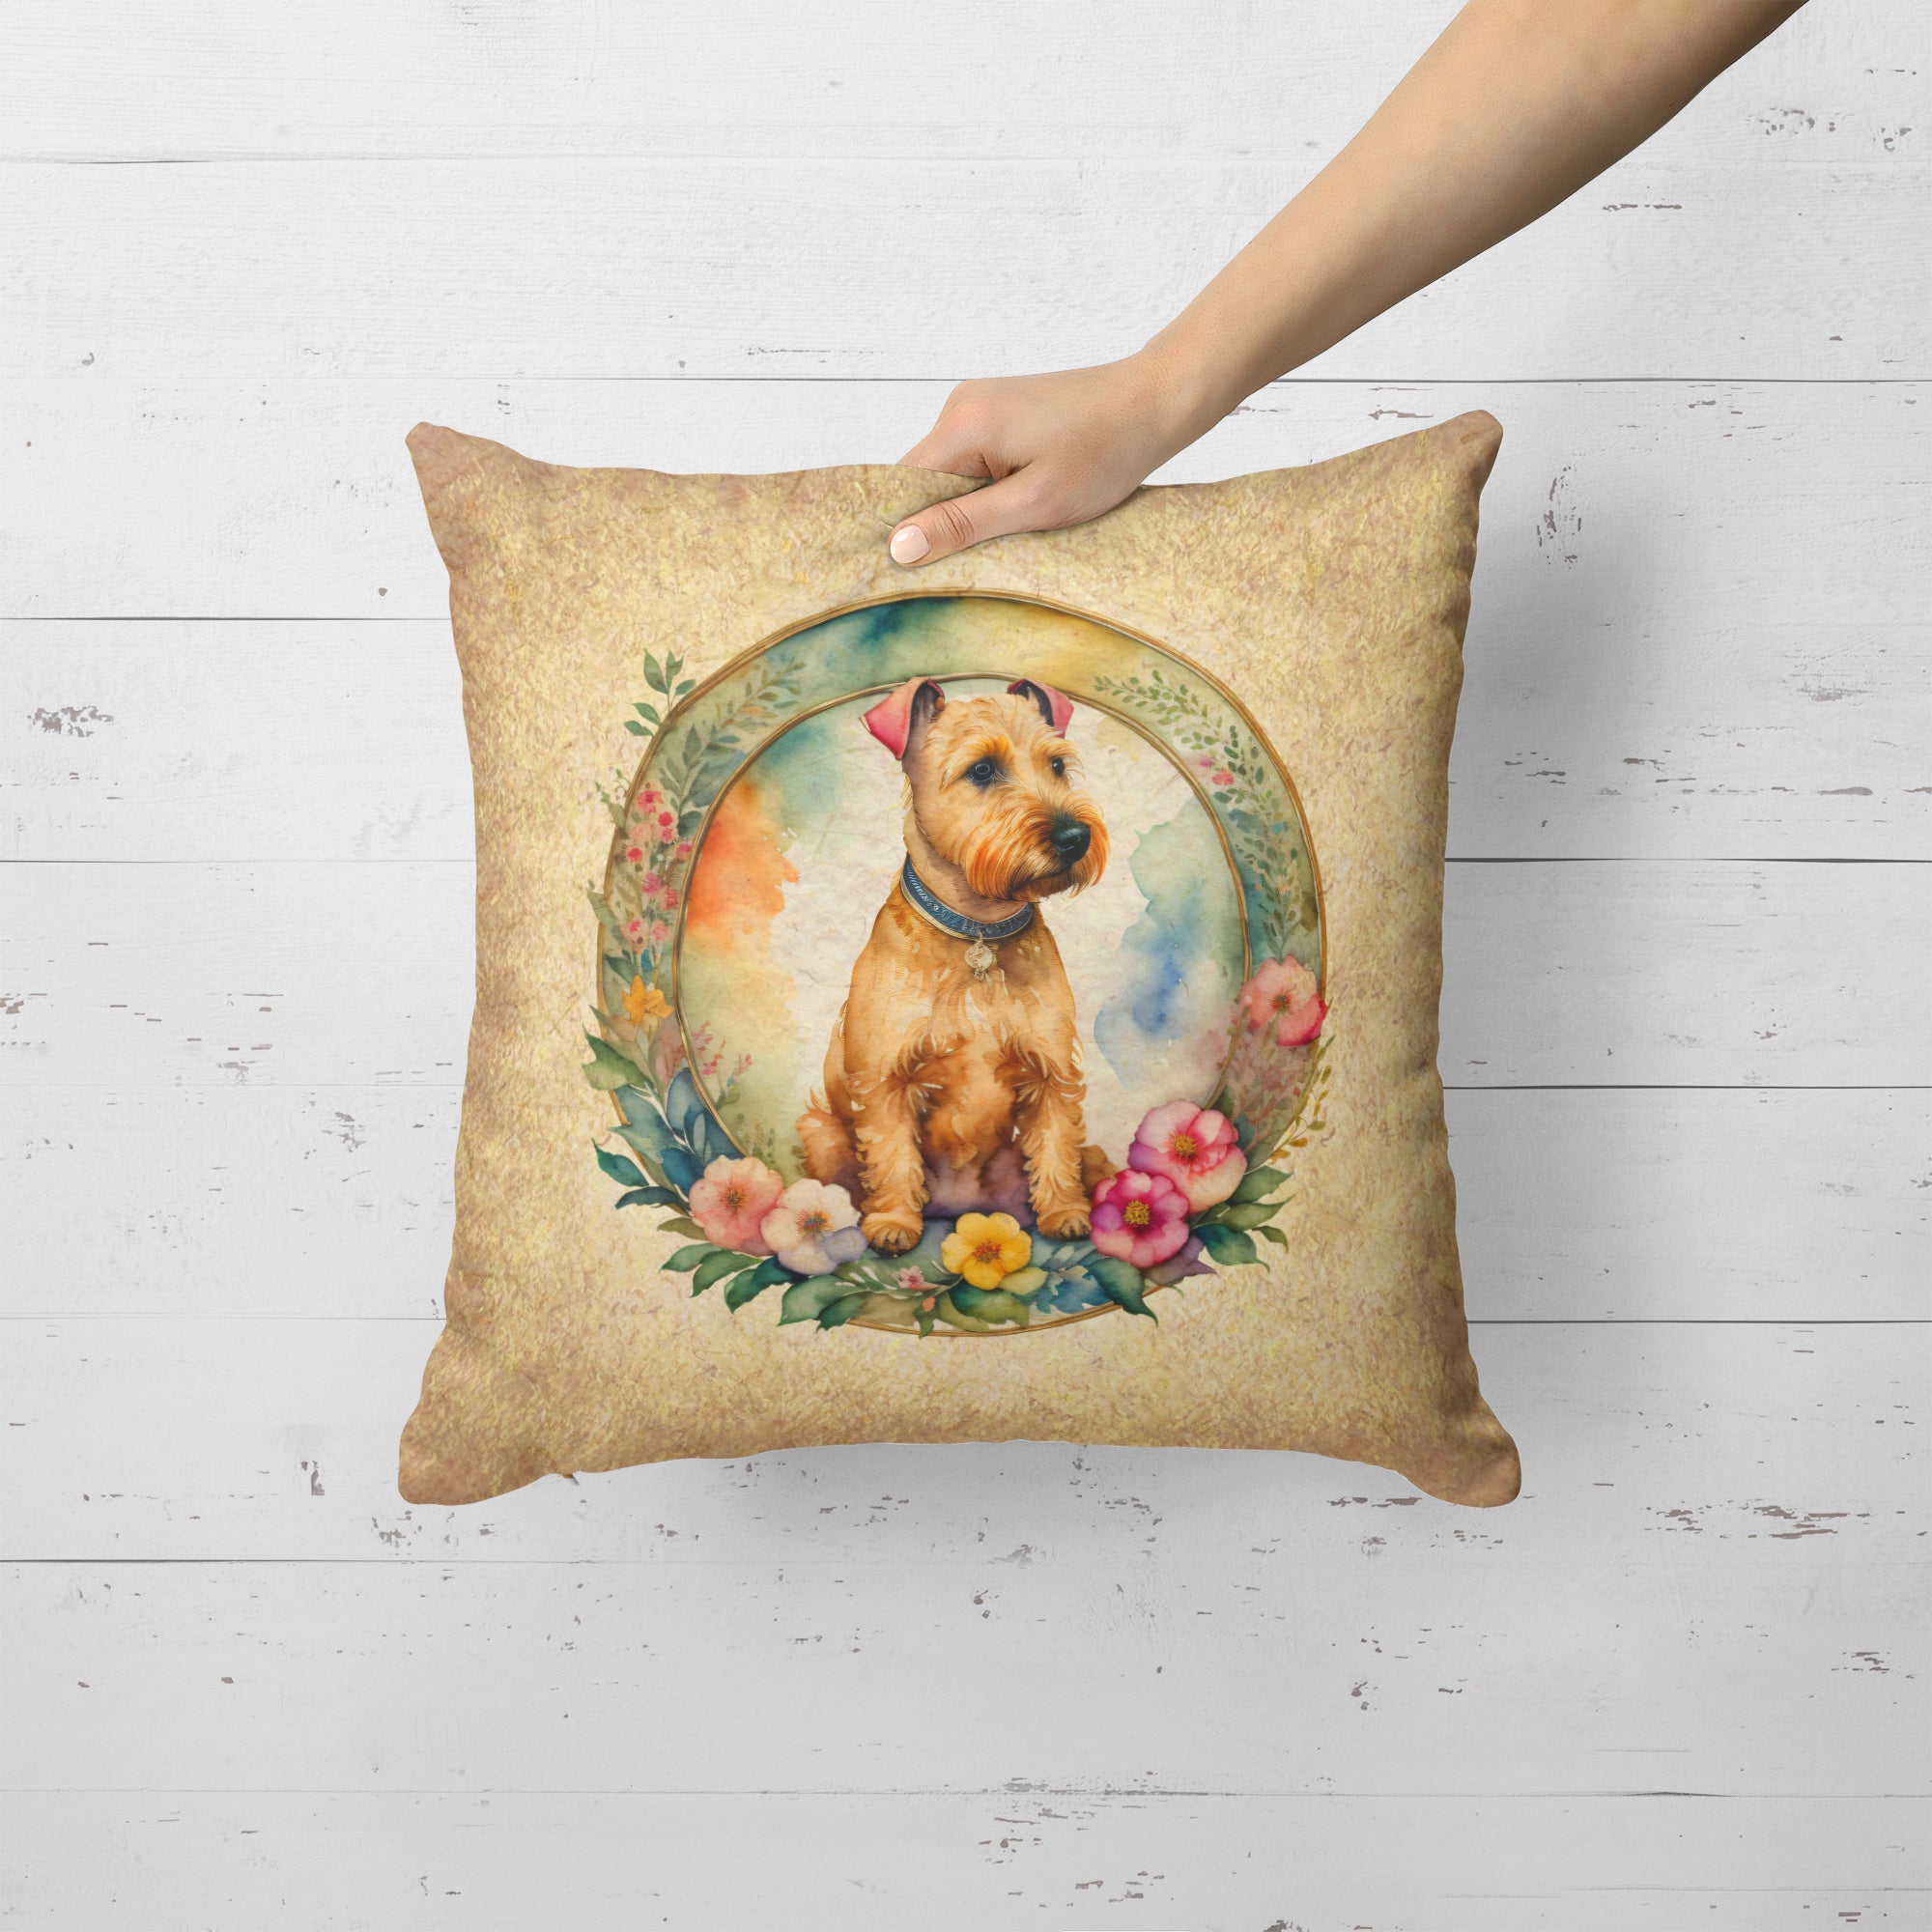 Buy this Lakeland Terrier and Flowers Fabric Decorative Pillow